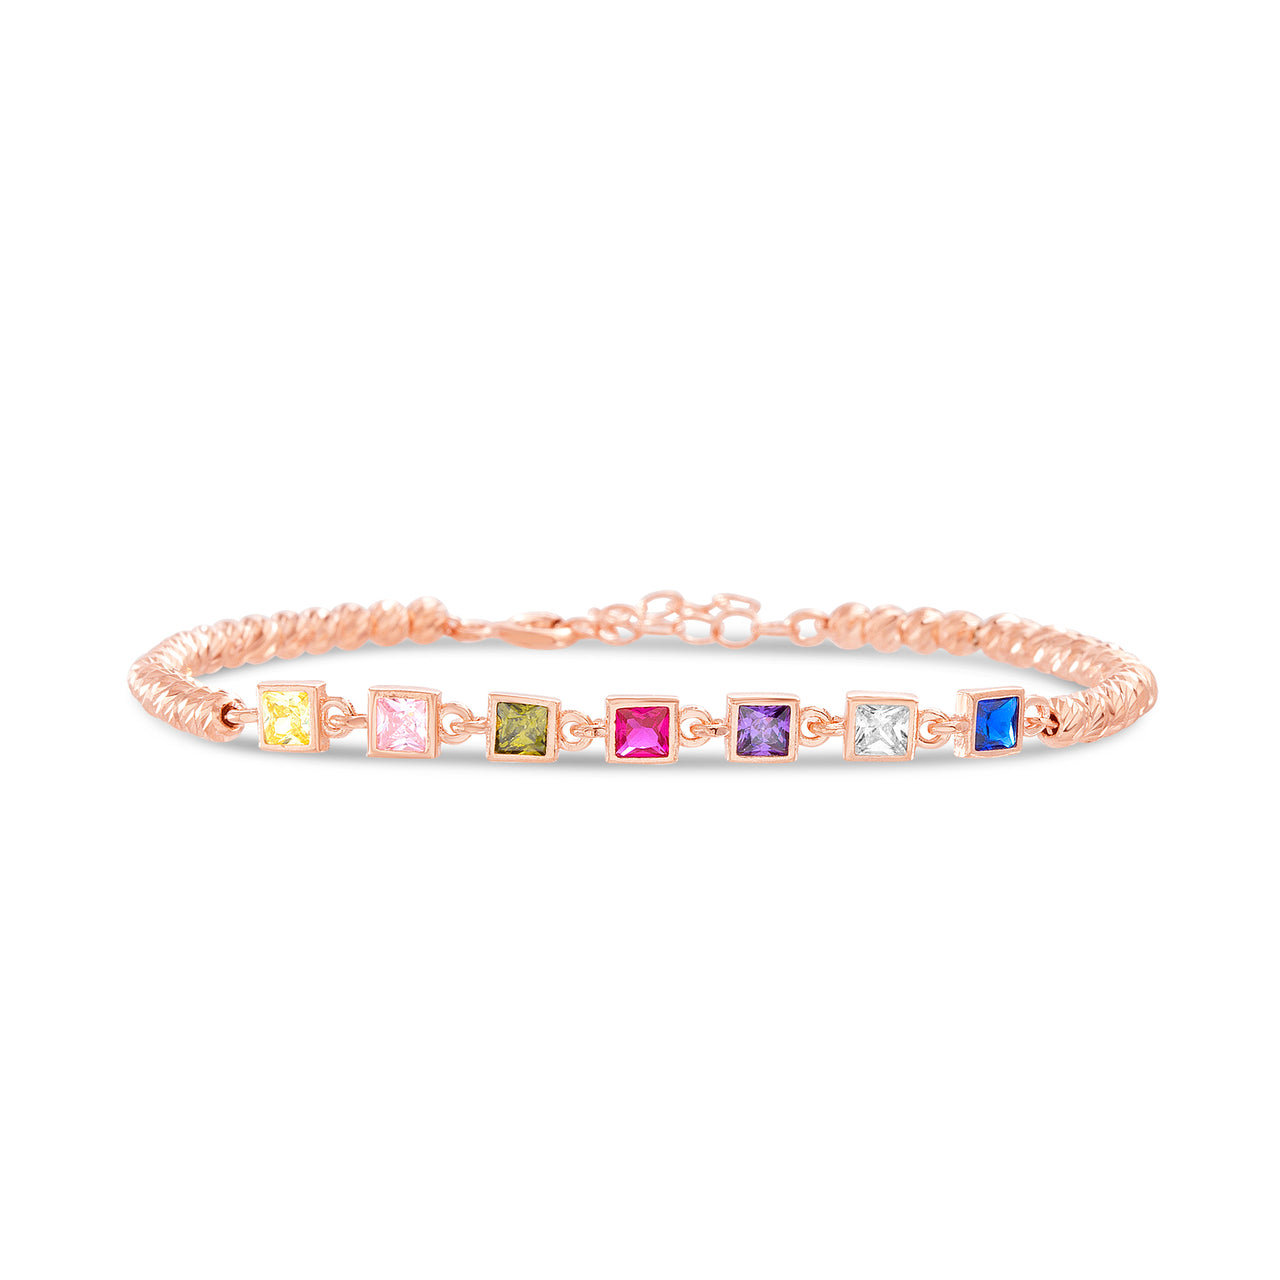 Lesa Michele Square Shaped Rainbow Cubic Zirconia 7" Beaded Tennis Bracelet in Sterling Silver